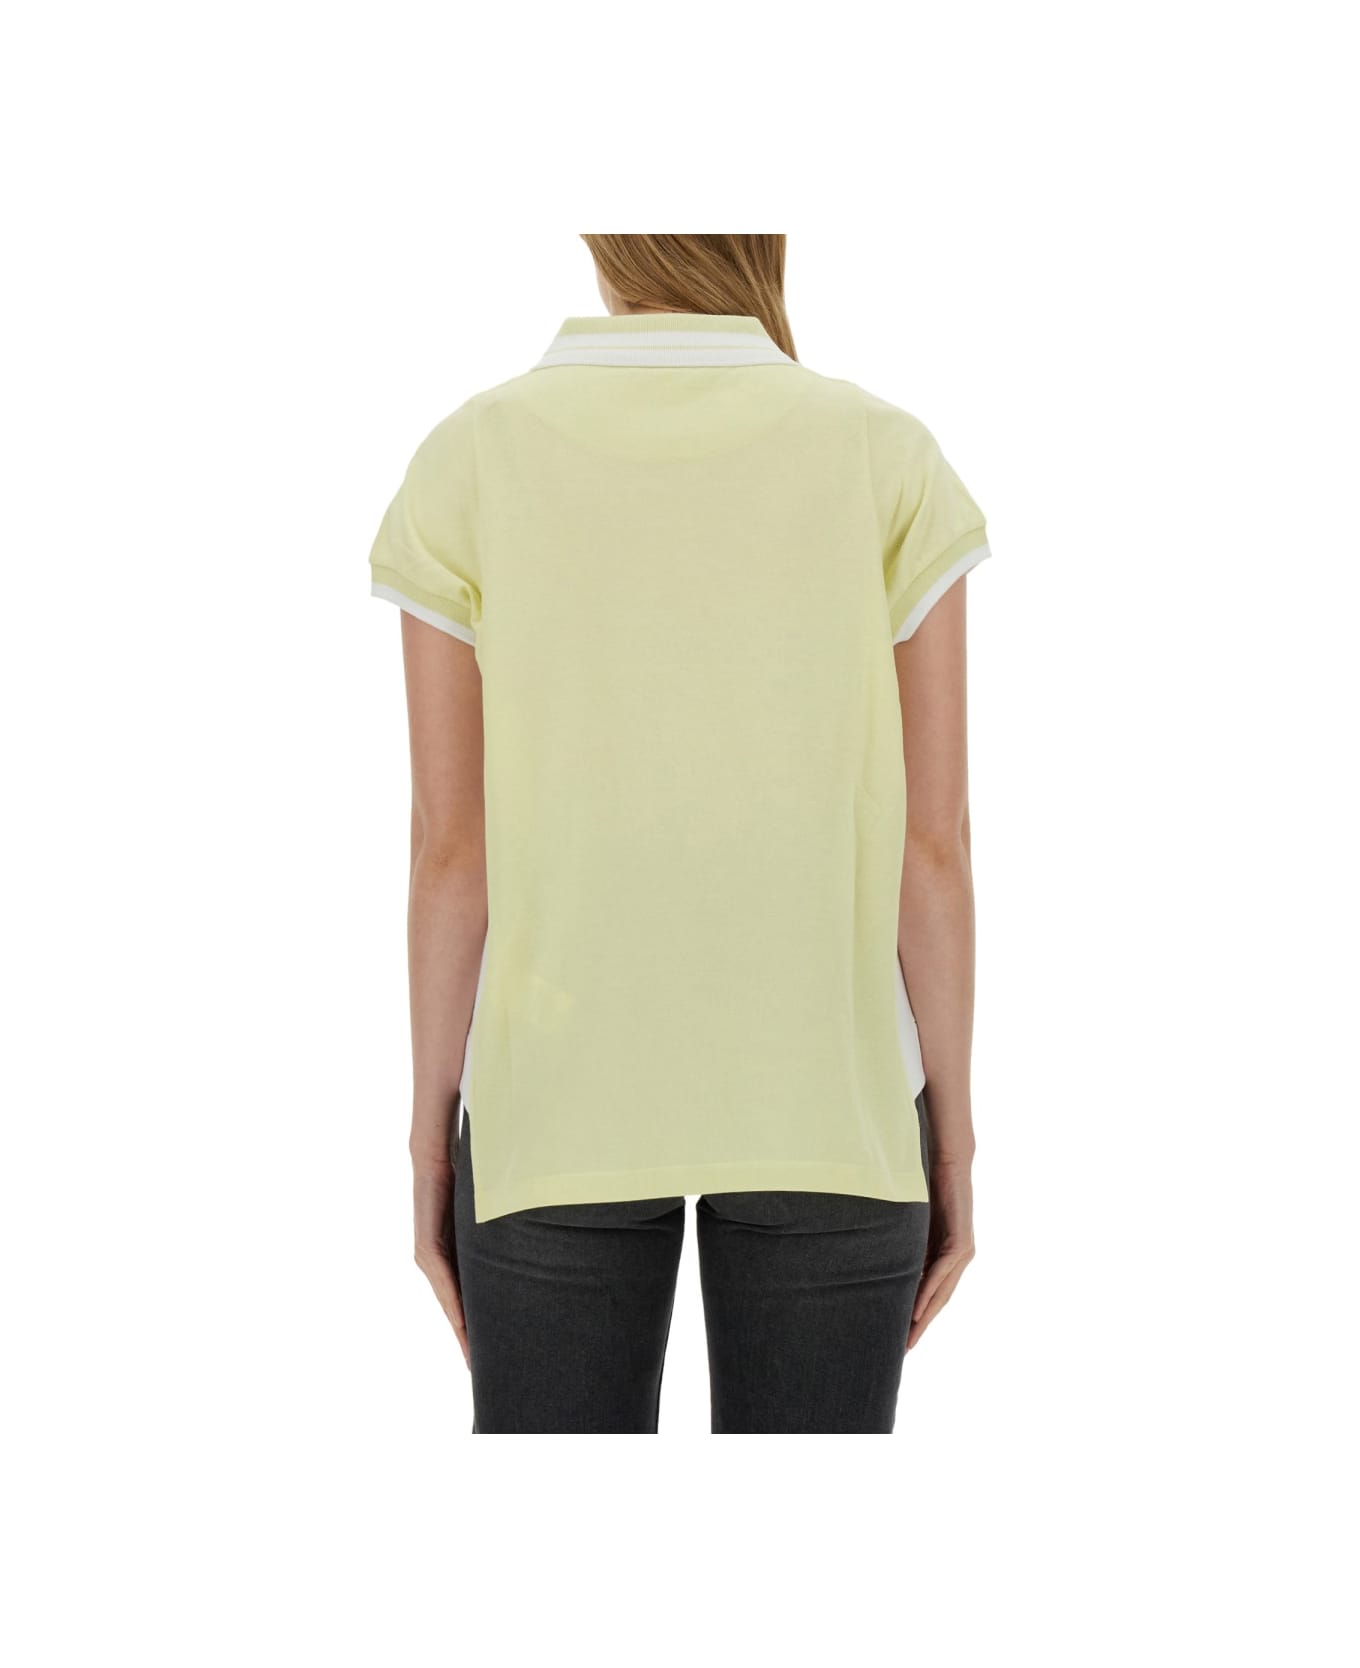 Vivienne Westwood Cotton Polo - YELLOW